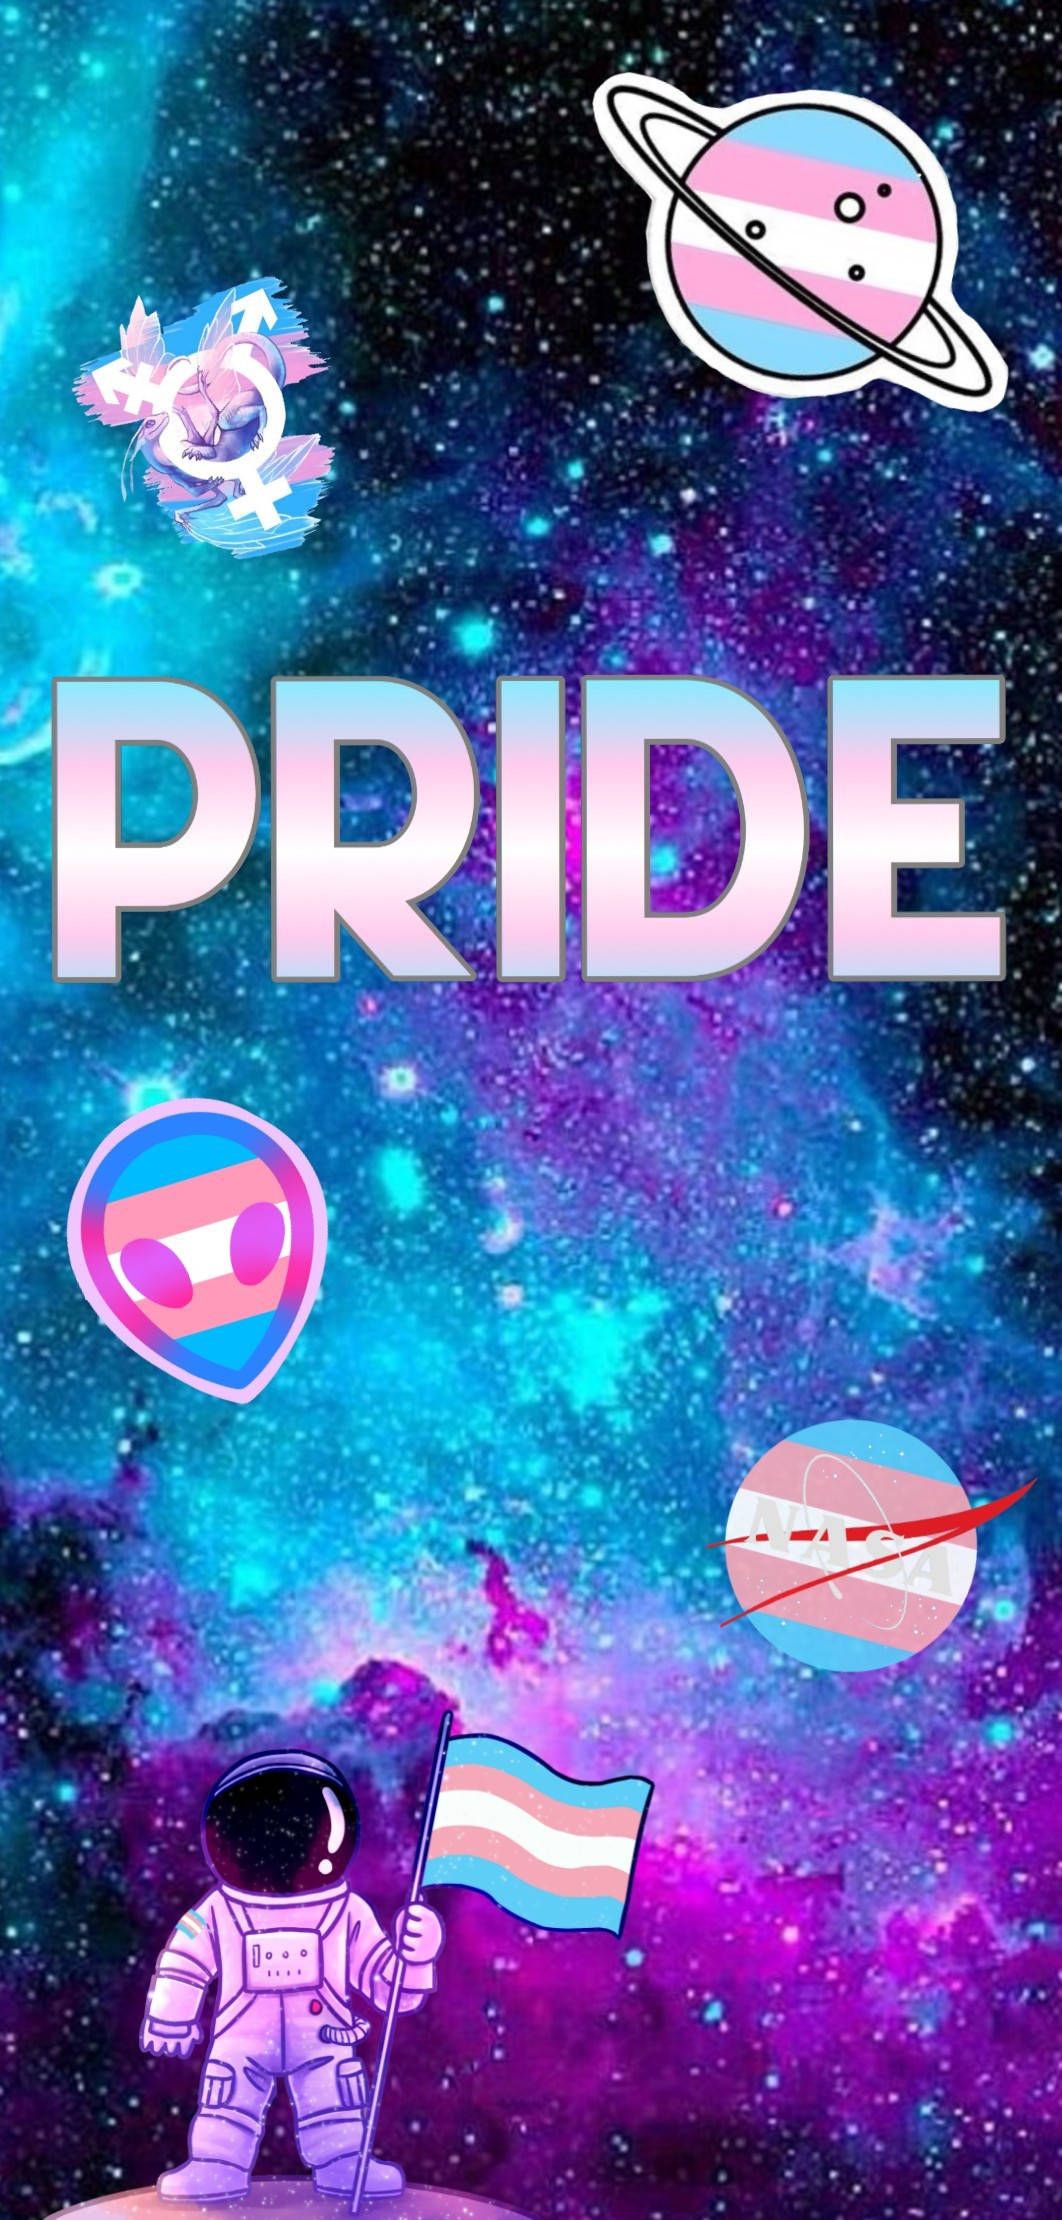 Pride wallpaper with astronaut and trans flag - LGBT